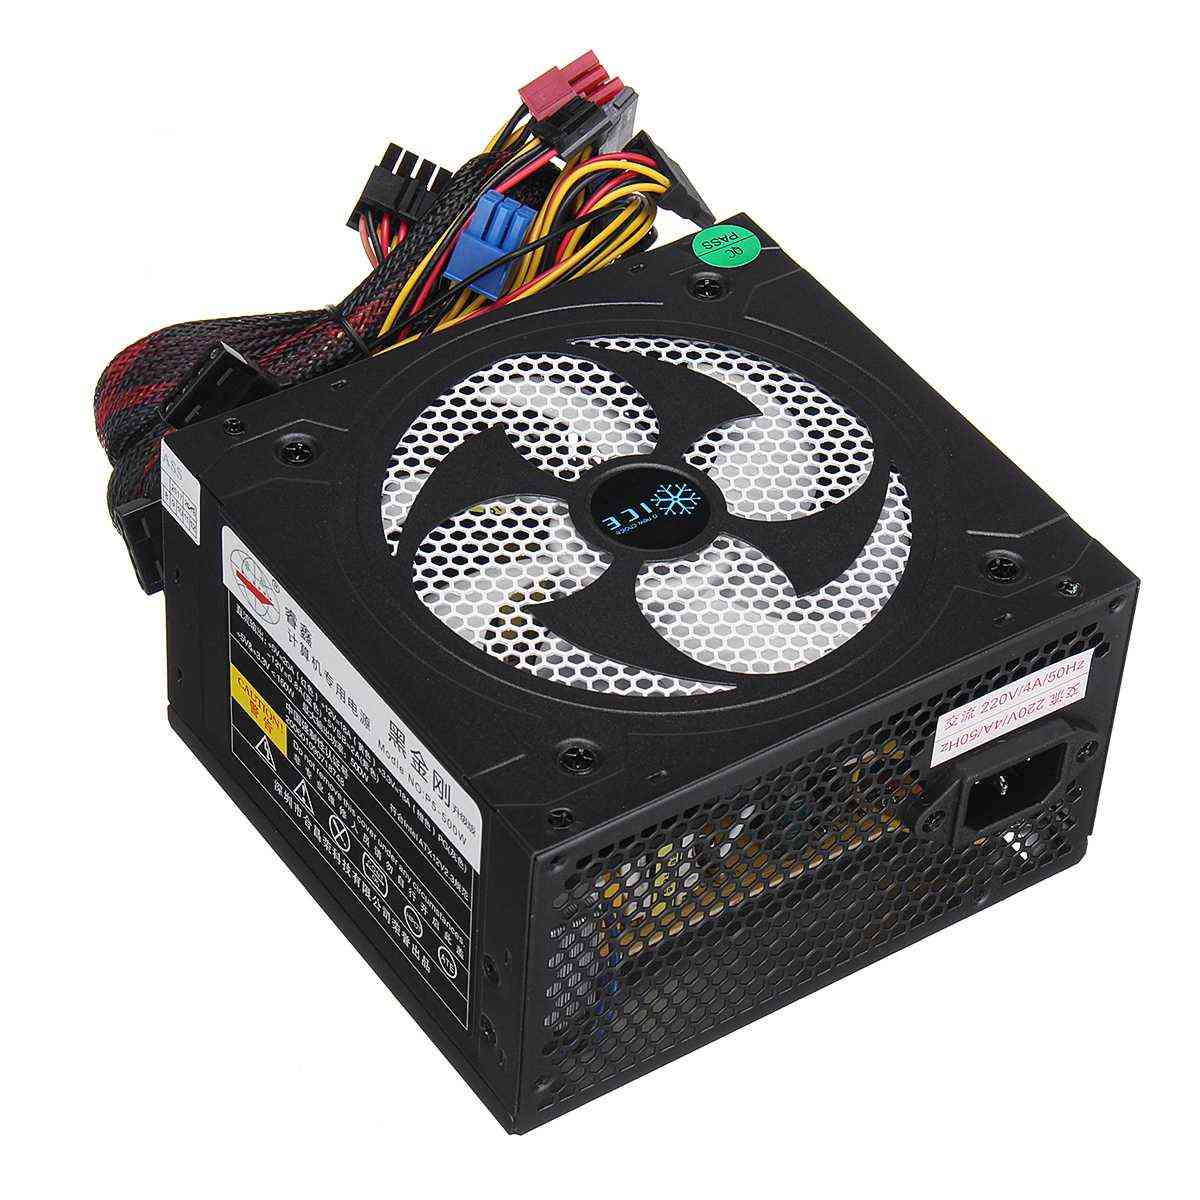 Quiet 500w Desktop Btc Minerv Pc Computer Power Supply With Sata 20pin+4pin For Miner Mining